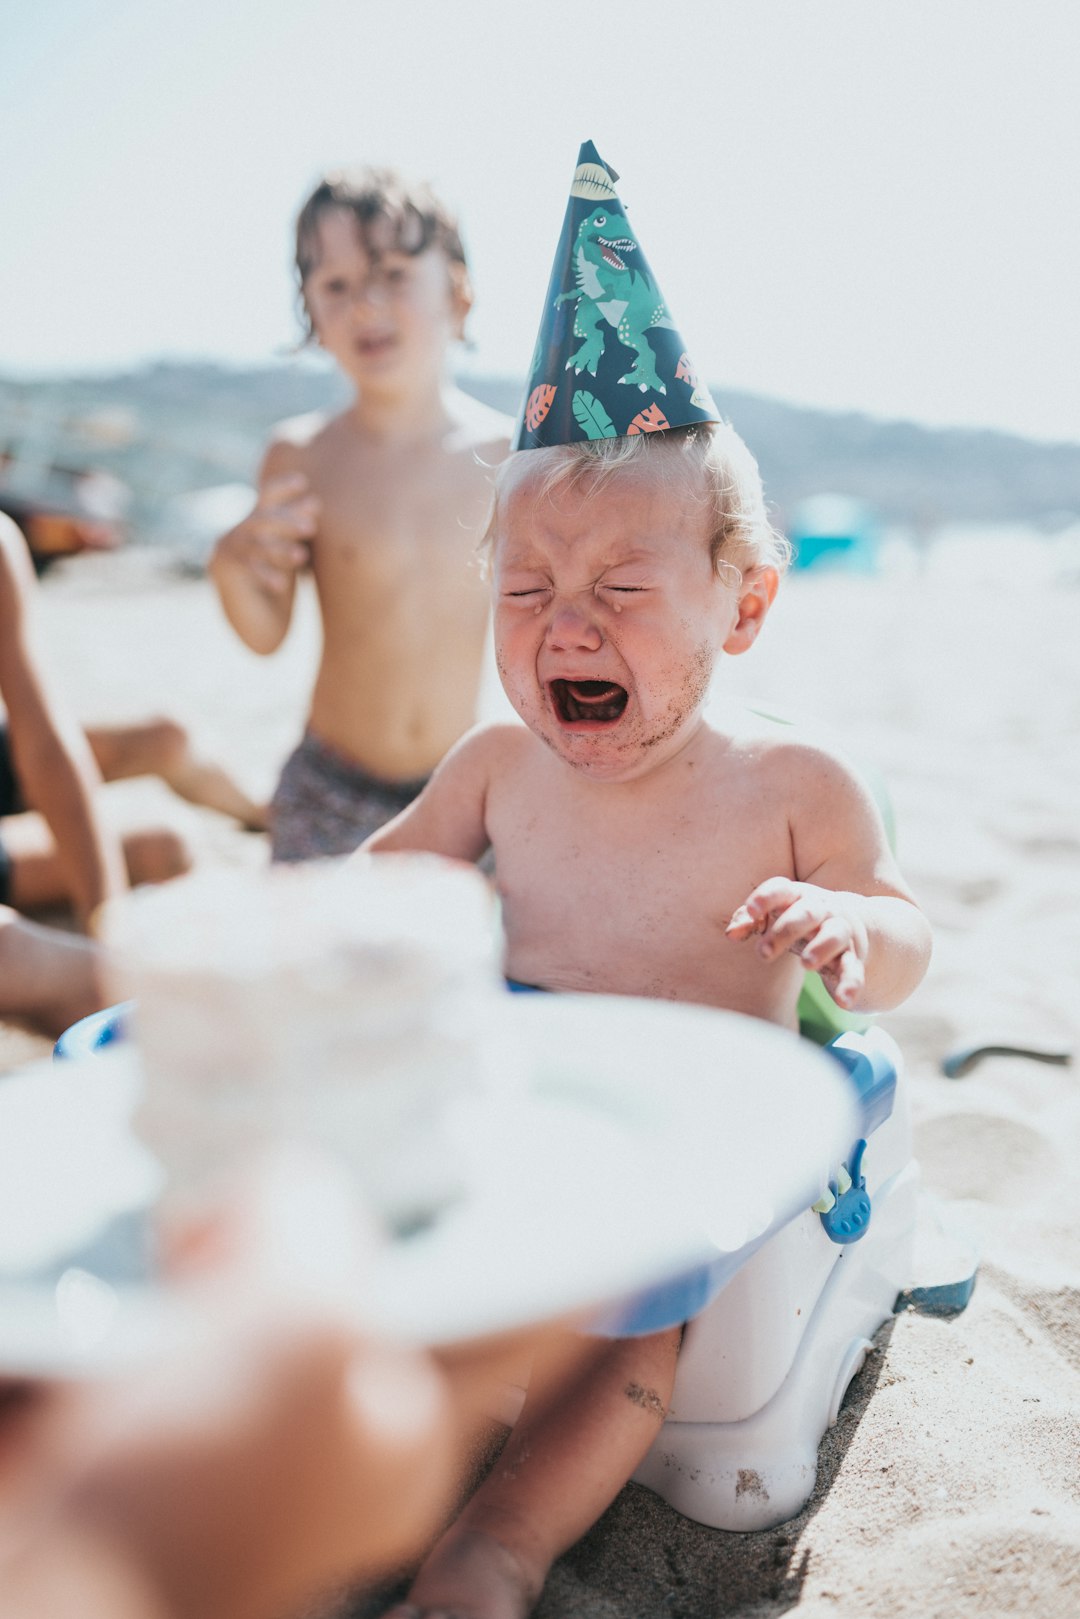 crying baby wearing dinosaur party hat during a birthday party on a beach. baby has either cake or sand or both smeared on face